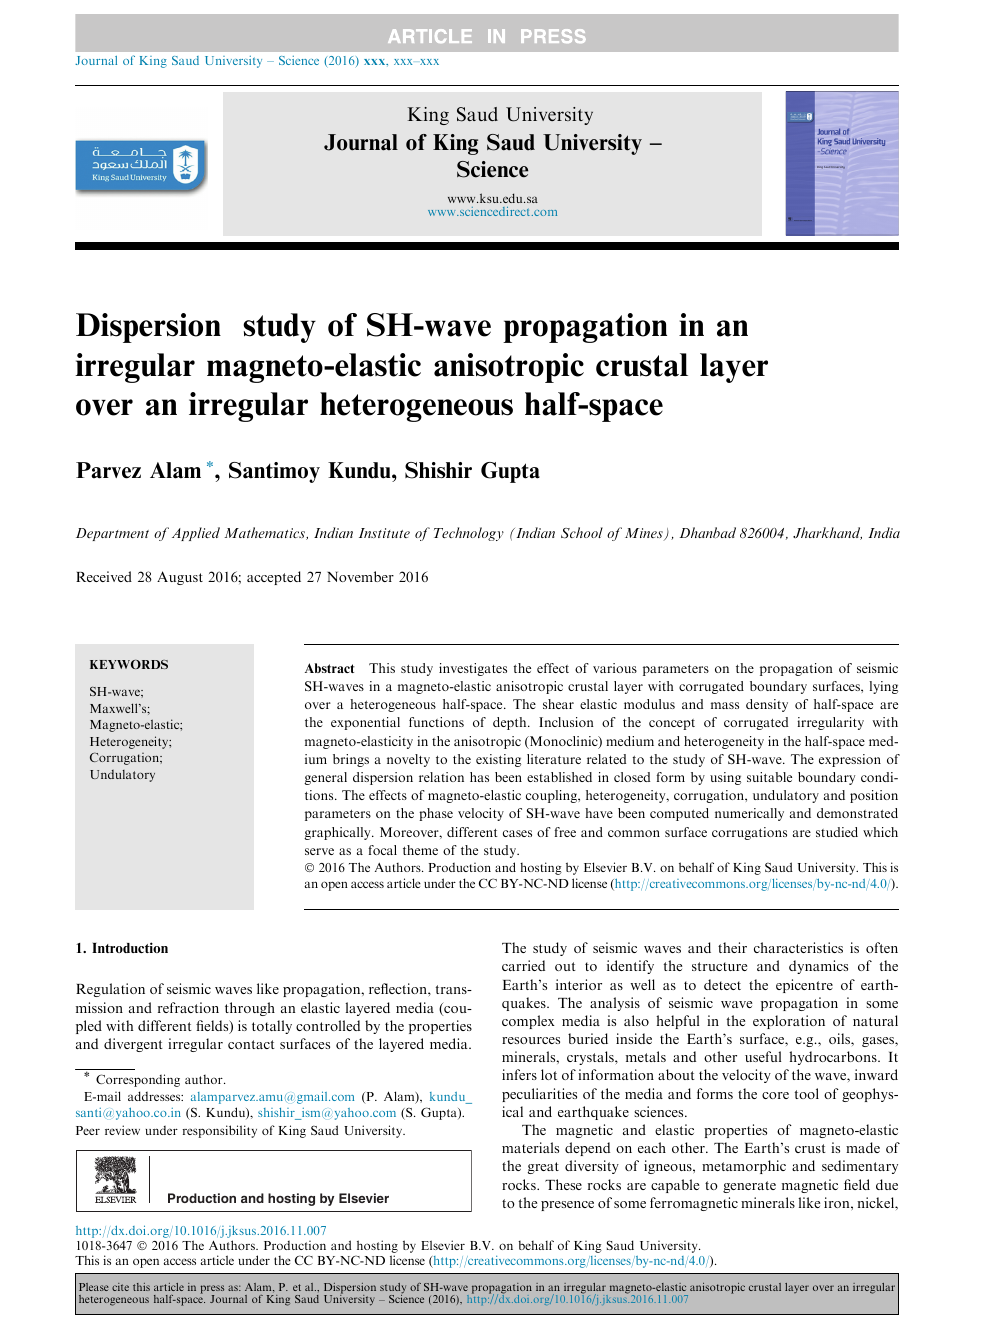 Dispersion Study Of Sh Wave Propagation In An Irregular Magneto Elastic Anisotropic Crustal Layer Over An Irregular Heterogeneous Half Space Topic Of Research Paper In Materials Engineering Download Scholarly Article Pdf And Read For